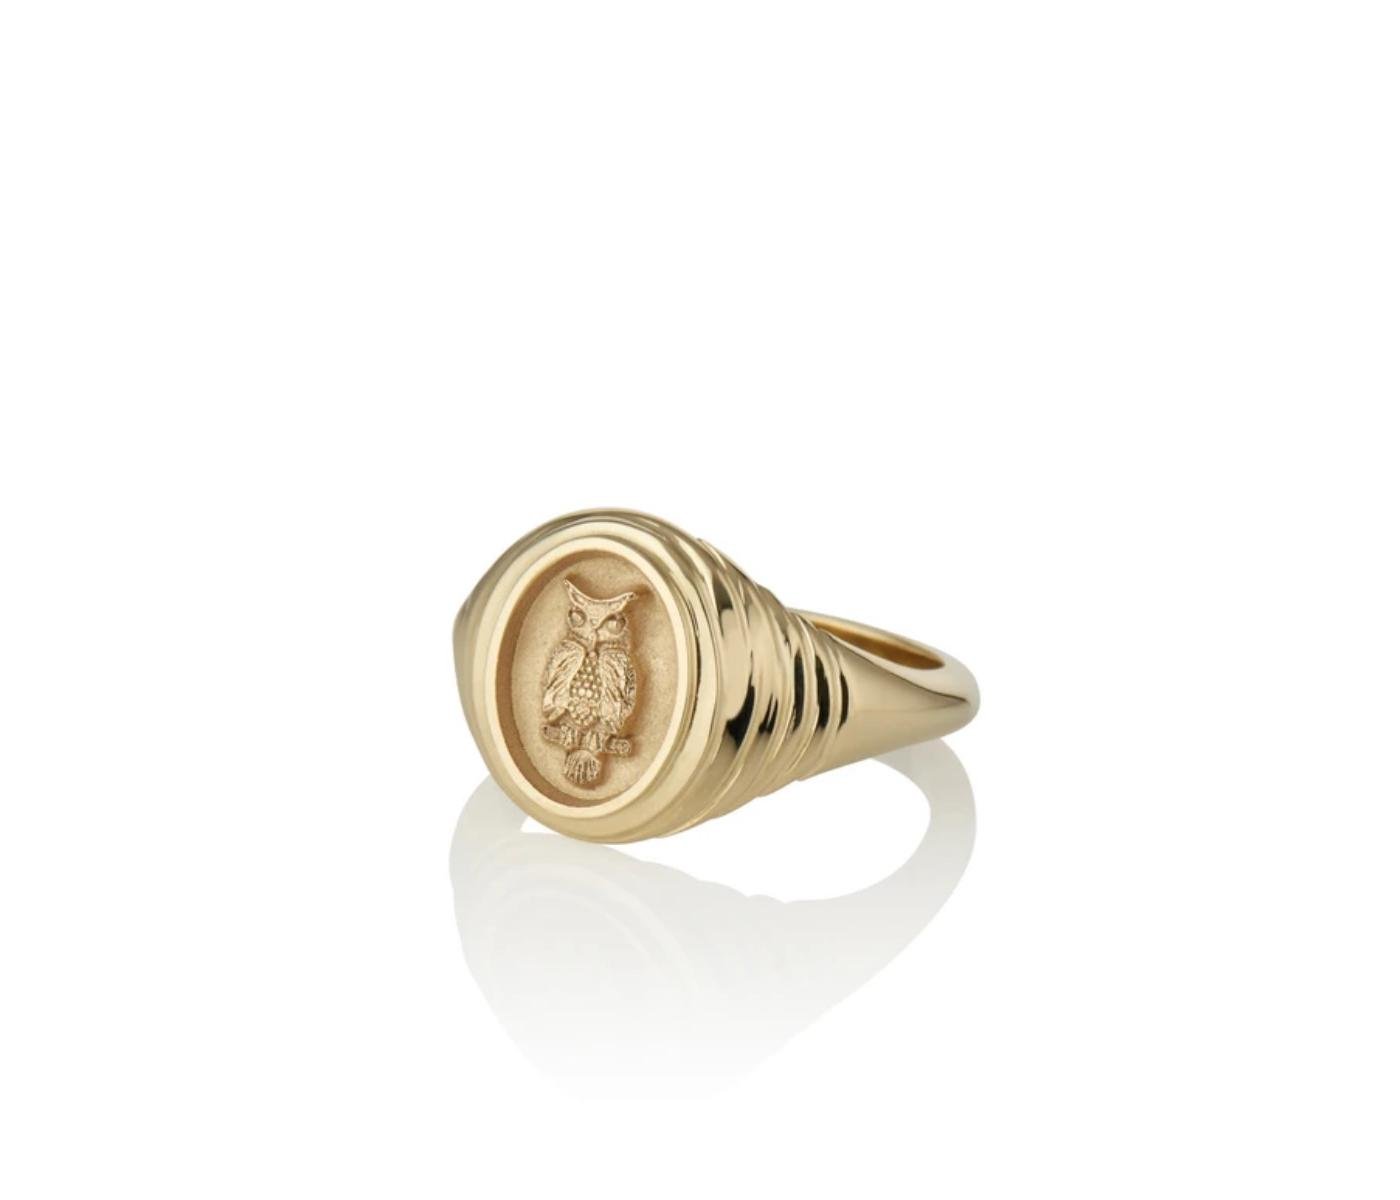 Ring by Retrouvai